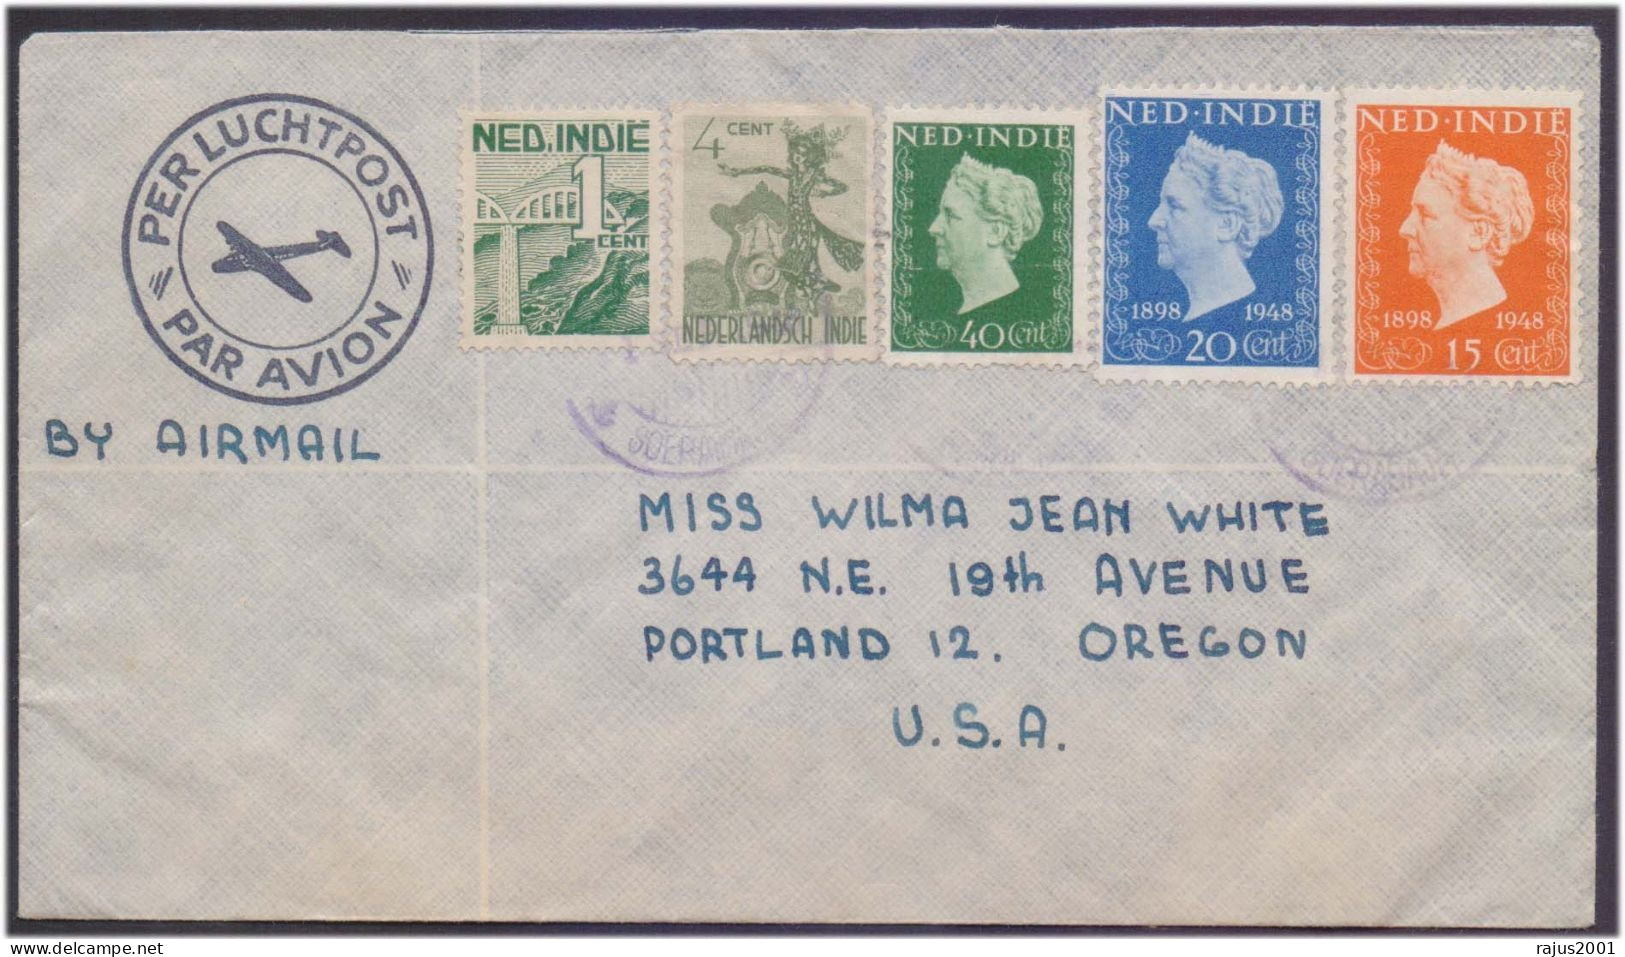 Queen Wilhelmina Of The Netherlands, Postal Stationery Netherlands Indies / India - NED INDIE Cover 1948 - Indes Néerlandaises